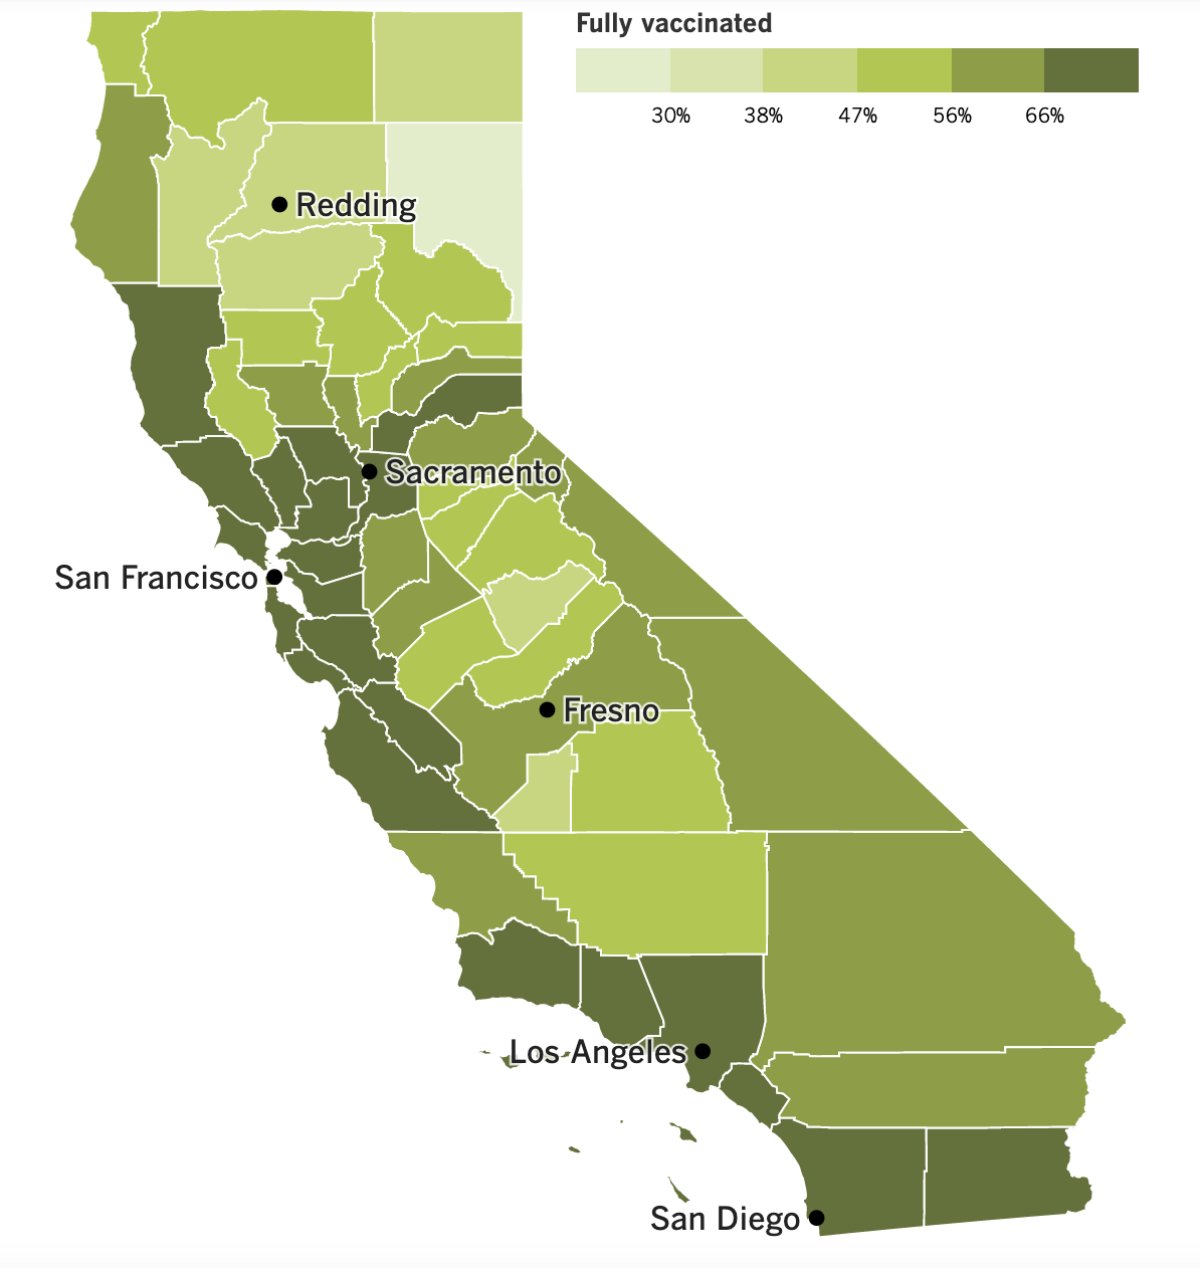 A map showing California's COVID-19 vaccination progress by county as of March 29, 2022.